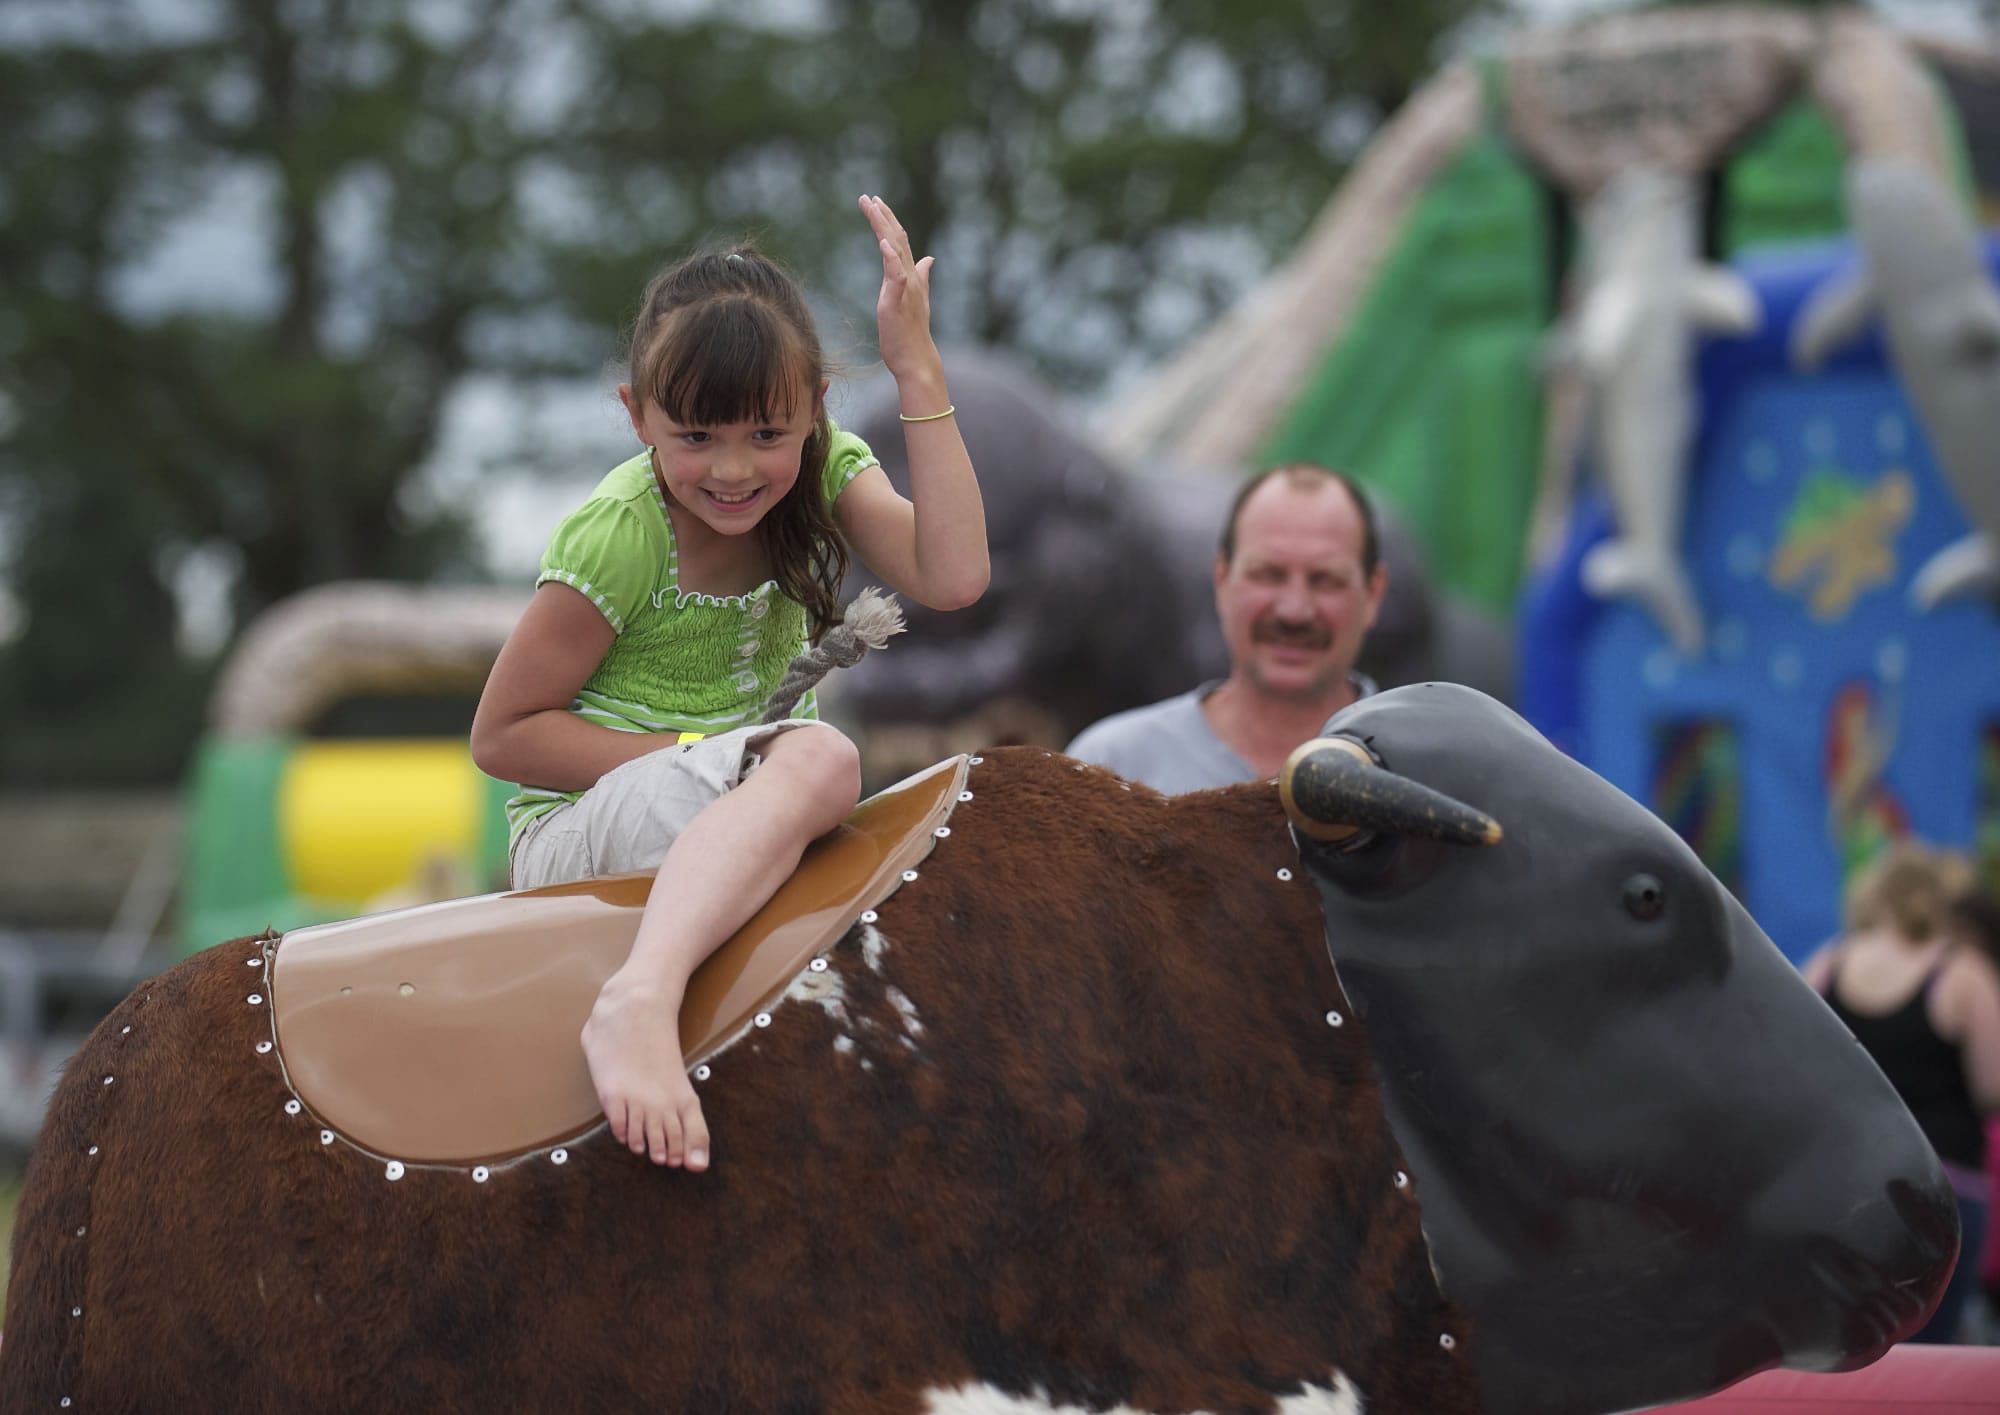 Talayna Dunaway, 7, of Battle Ground, does her best to stay atop a mechanical bull while her grandfather David Green watches from the background at Harvest Days in Battle Ground on Sunday July 22, 2012.